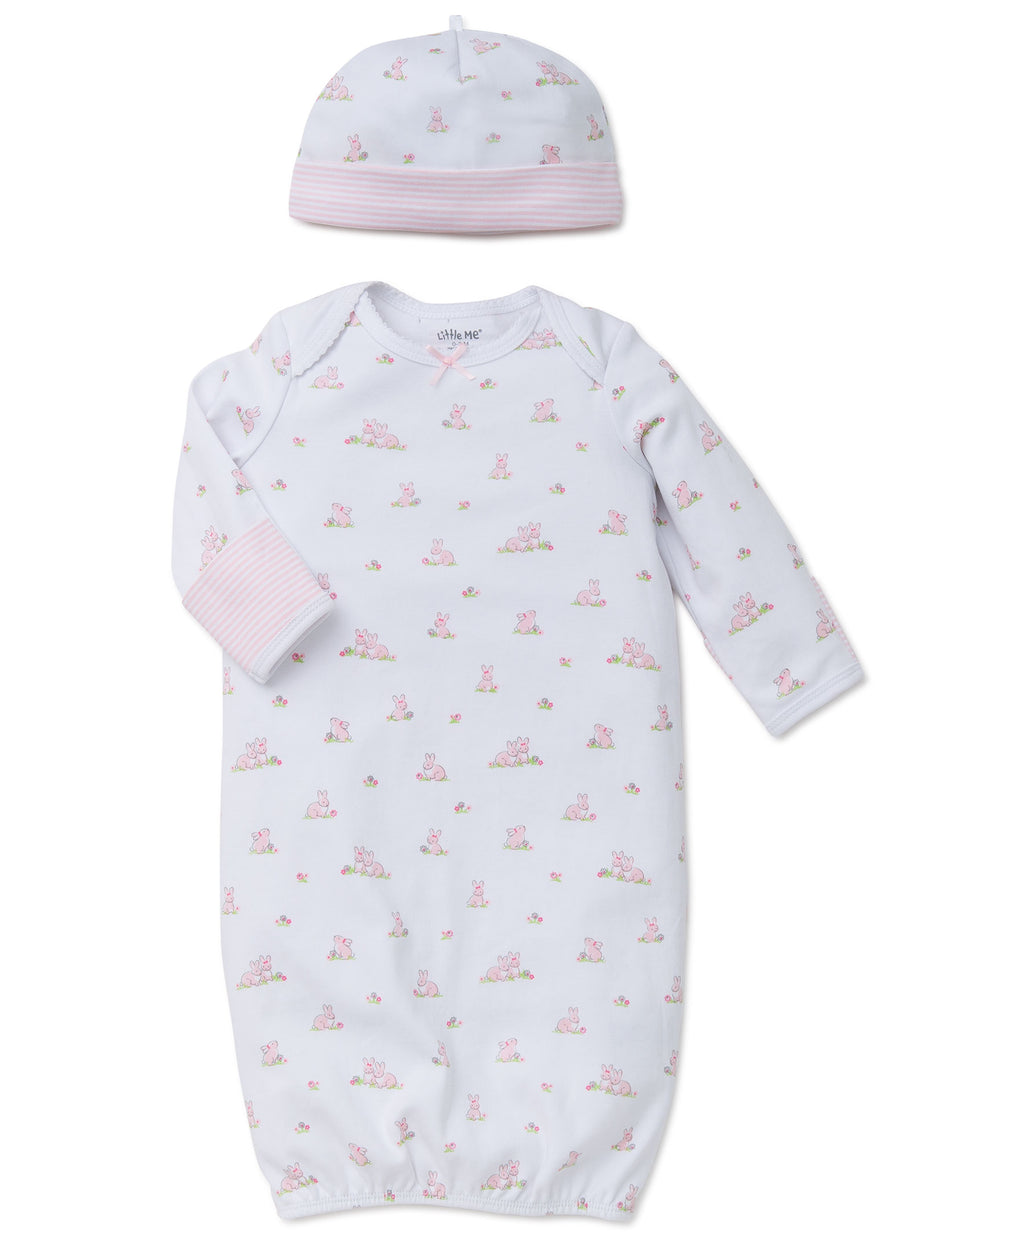 Baby Bunnies Sleeper Gown And Hat - Little Me